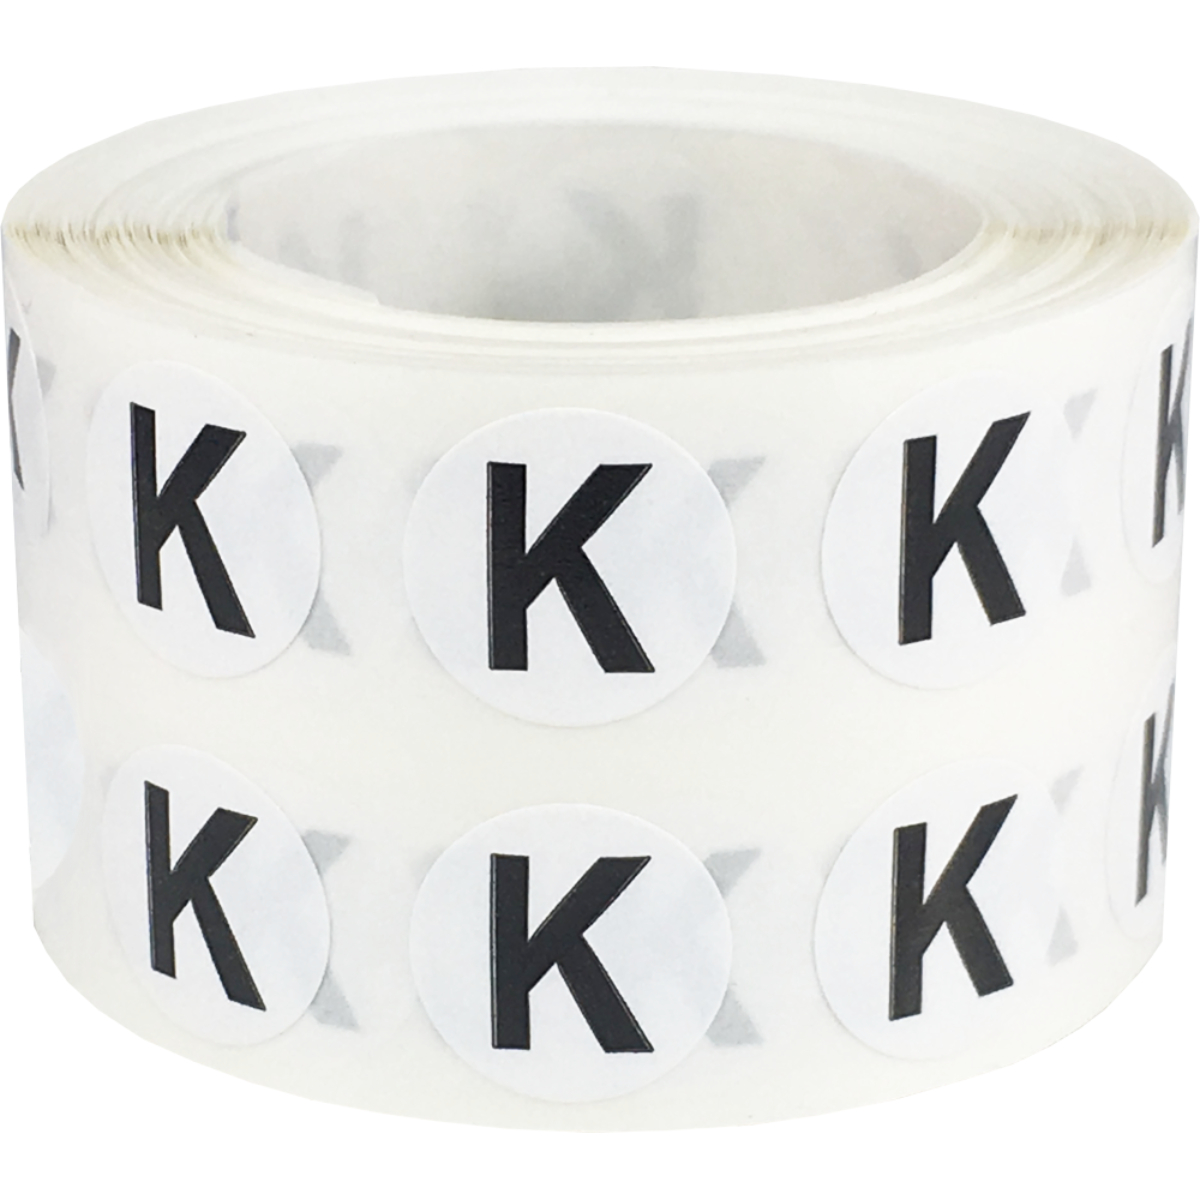 Small Letter K Stickers 1/2 Round